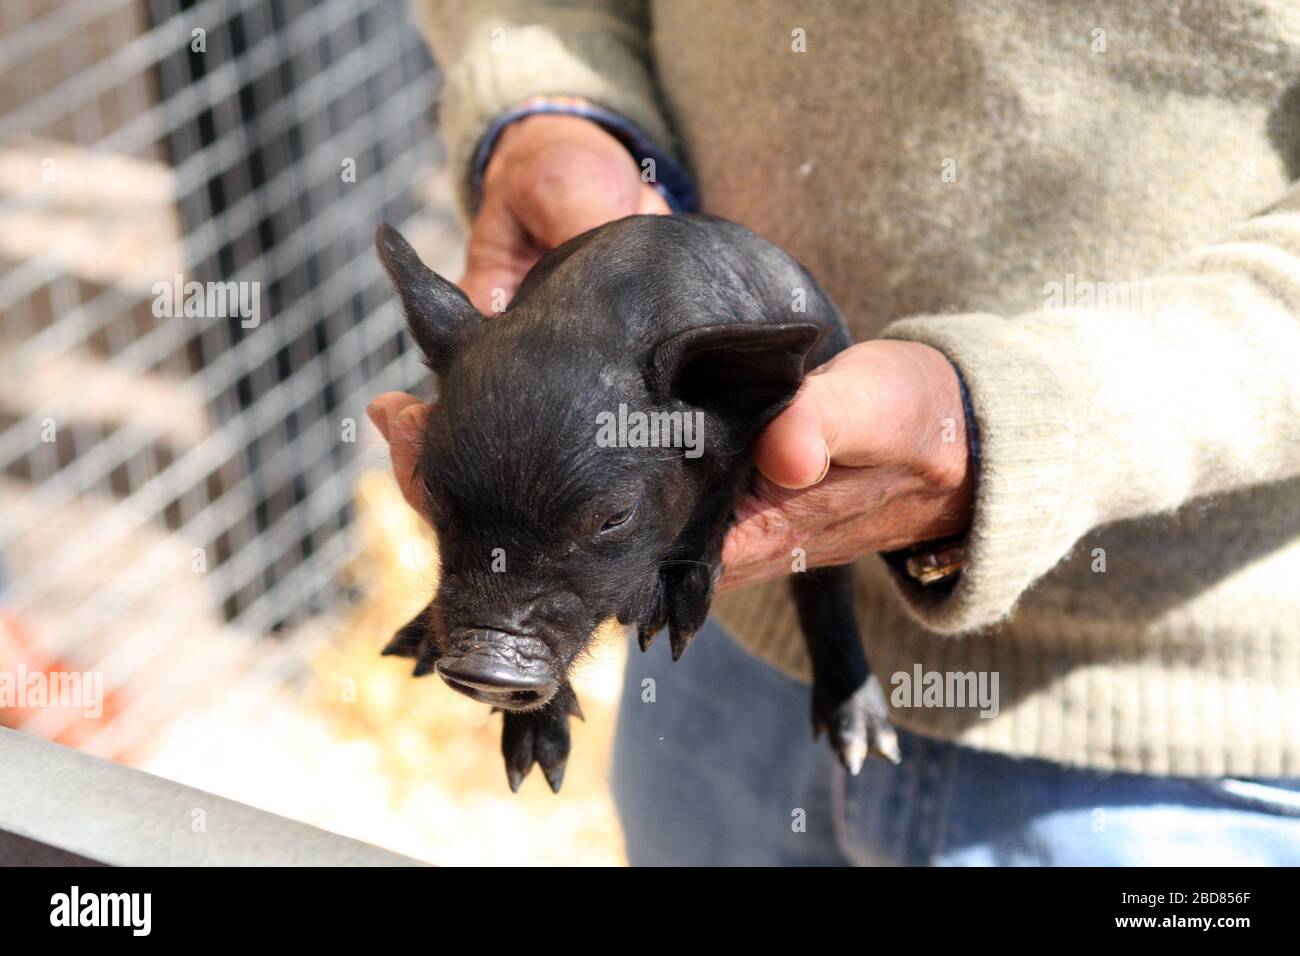 Black Iberian pig (Sus scrofa f. domestica), piglet in the hands of a marketer on a weekly market, front view, Spain, Balearic Islands, Majorca Stock Photo